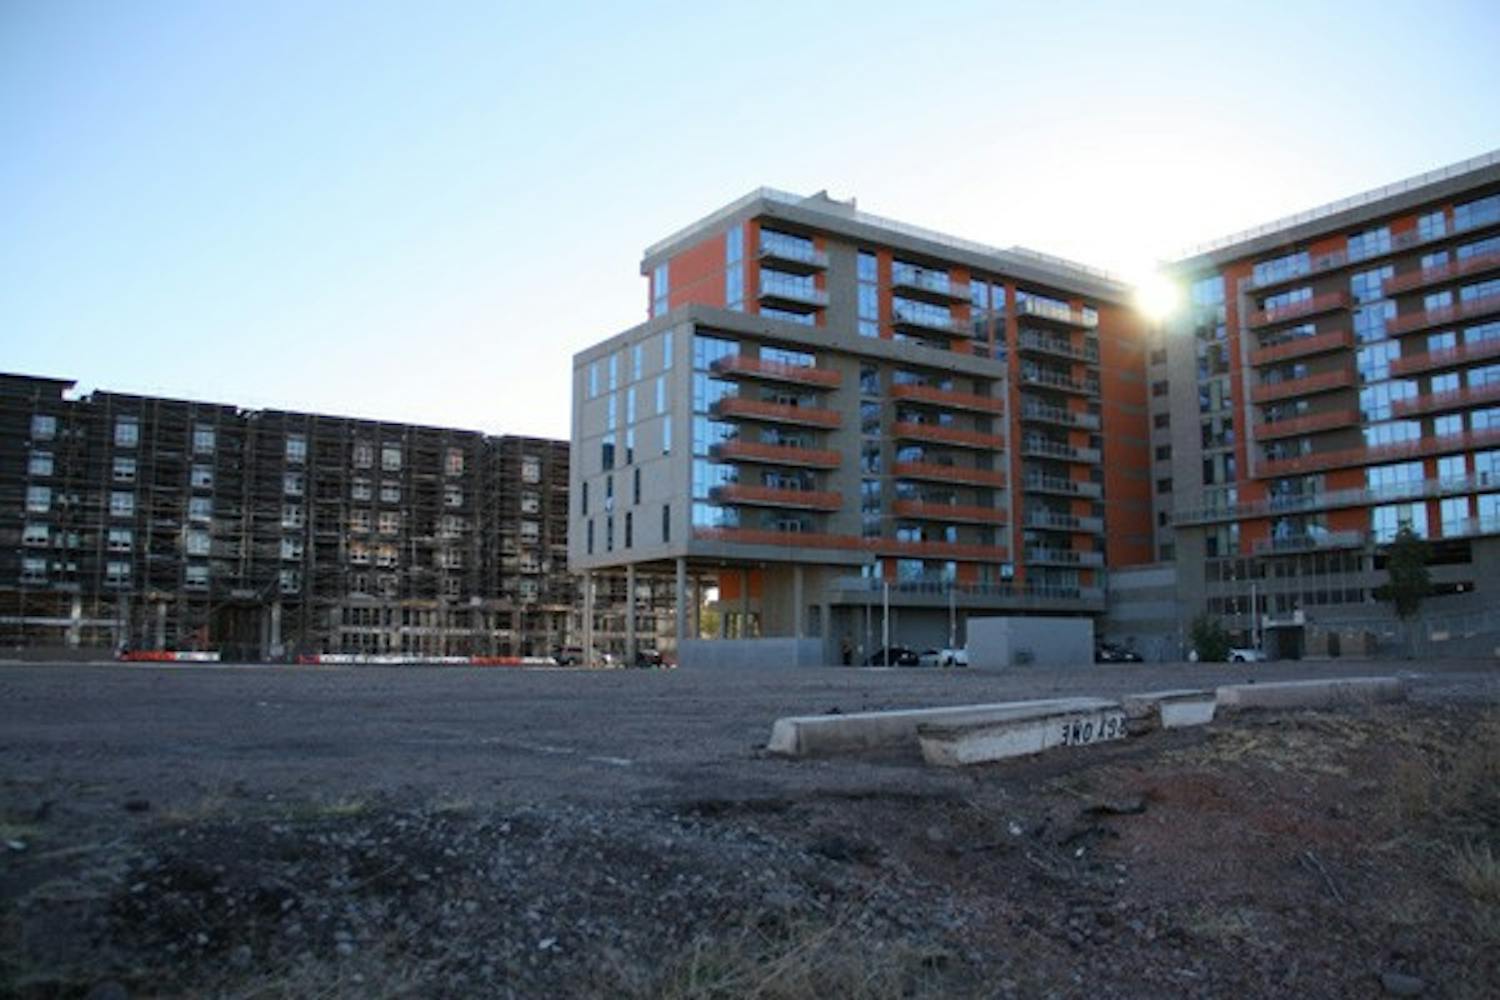 The Grove, expected to begin construction on the empty lot before 2014, has sparked controversy with the City of Tempe and surrounding neighborhoods as high-rise housing developments continue to increase near campus. (Photo by Shawn Raymundo) 